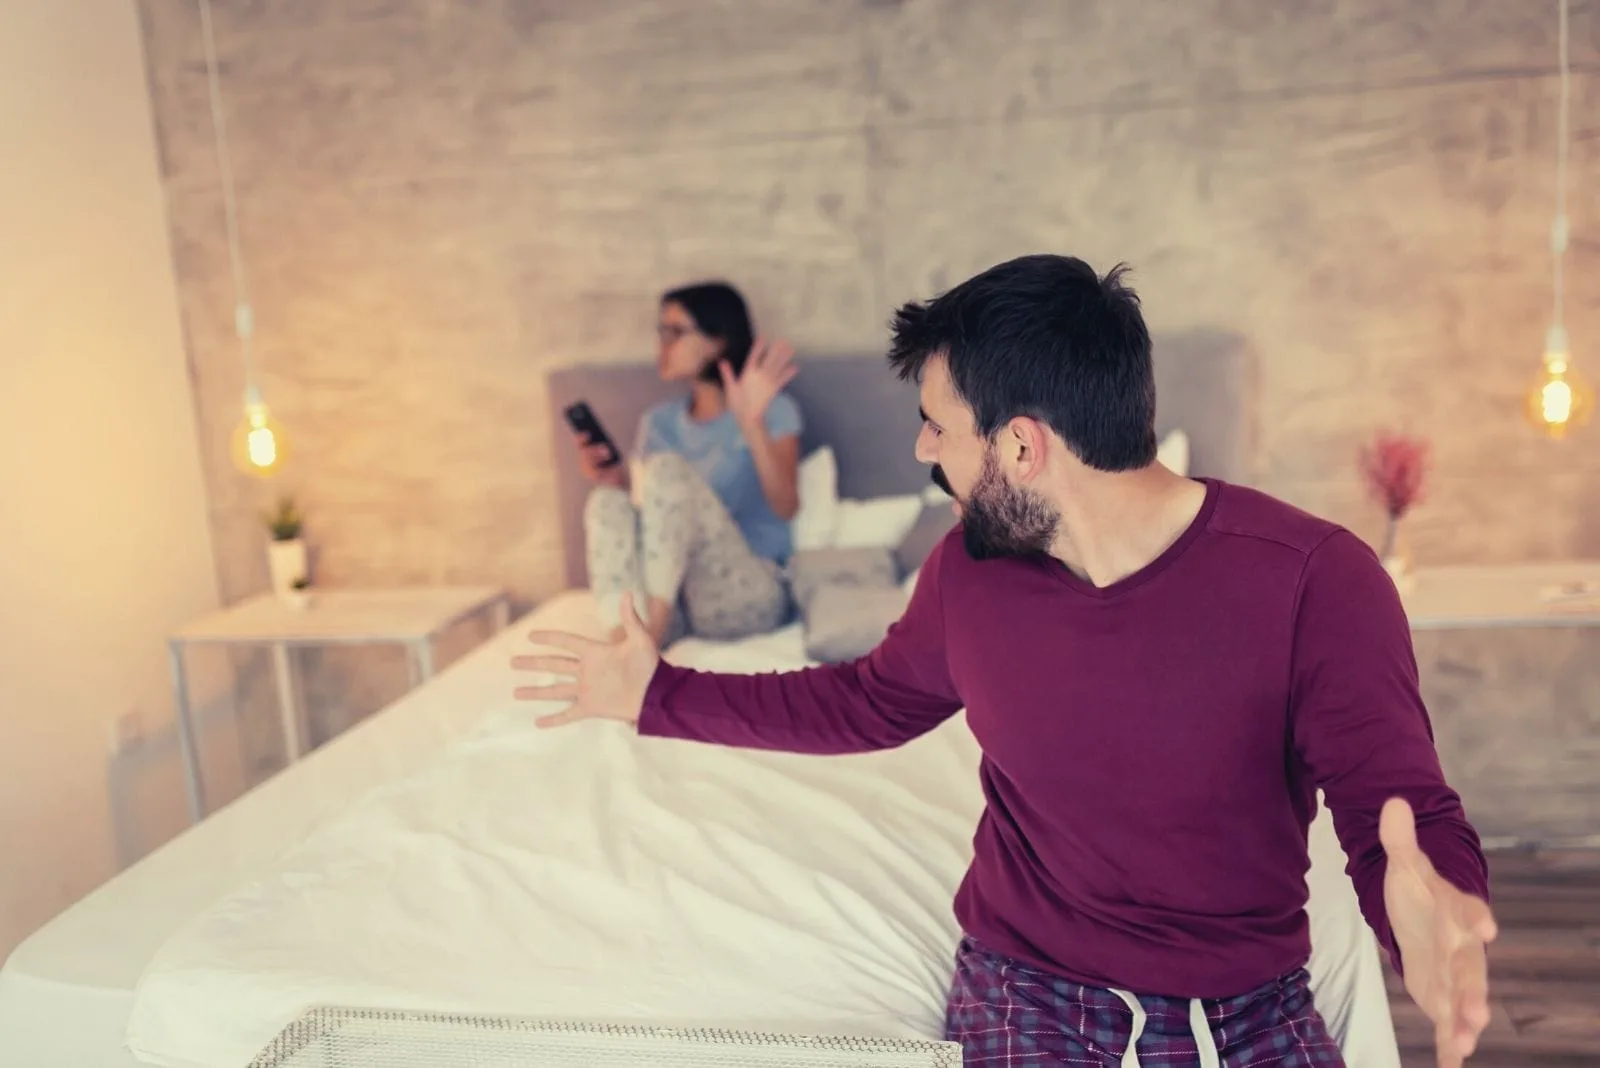 upset couple arguing in bed with the woman signing stop while looking at the smartphone